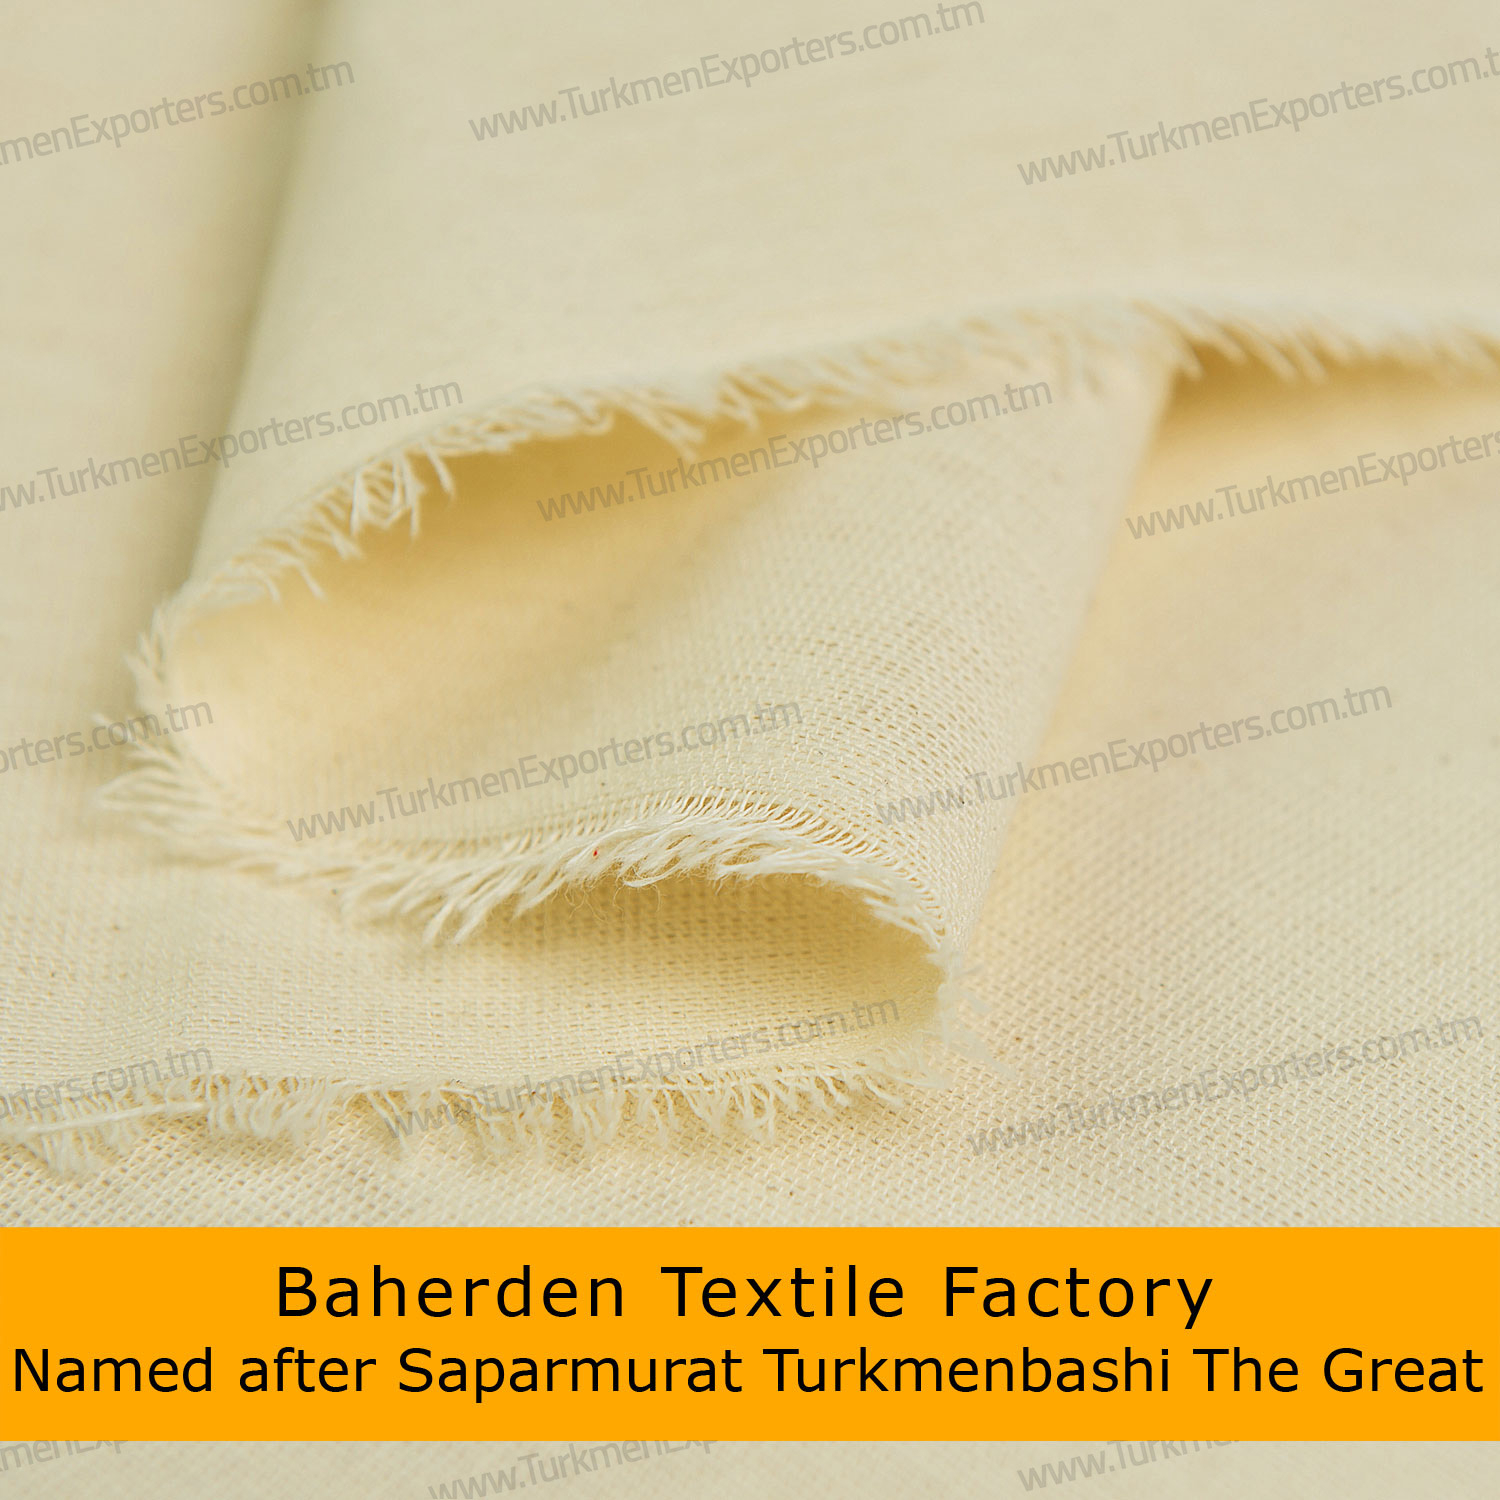 100% cotton greige flannel fabric | Baherden textile factory named after Saparmurat Turkmenbashi the great